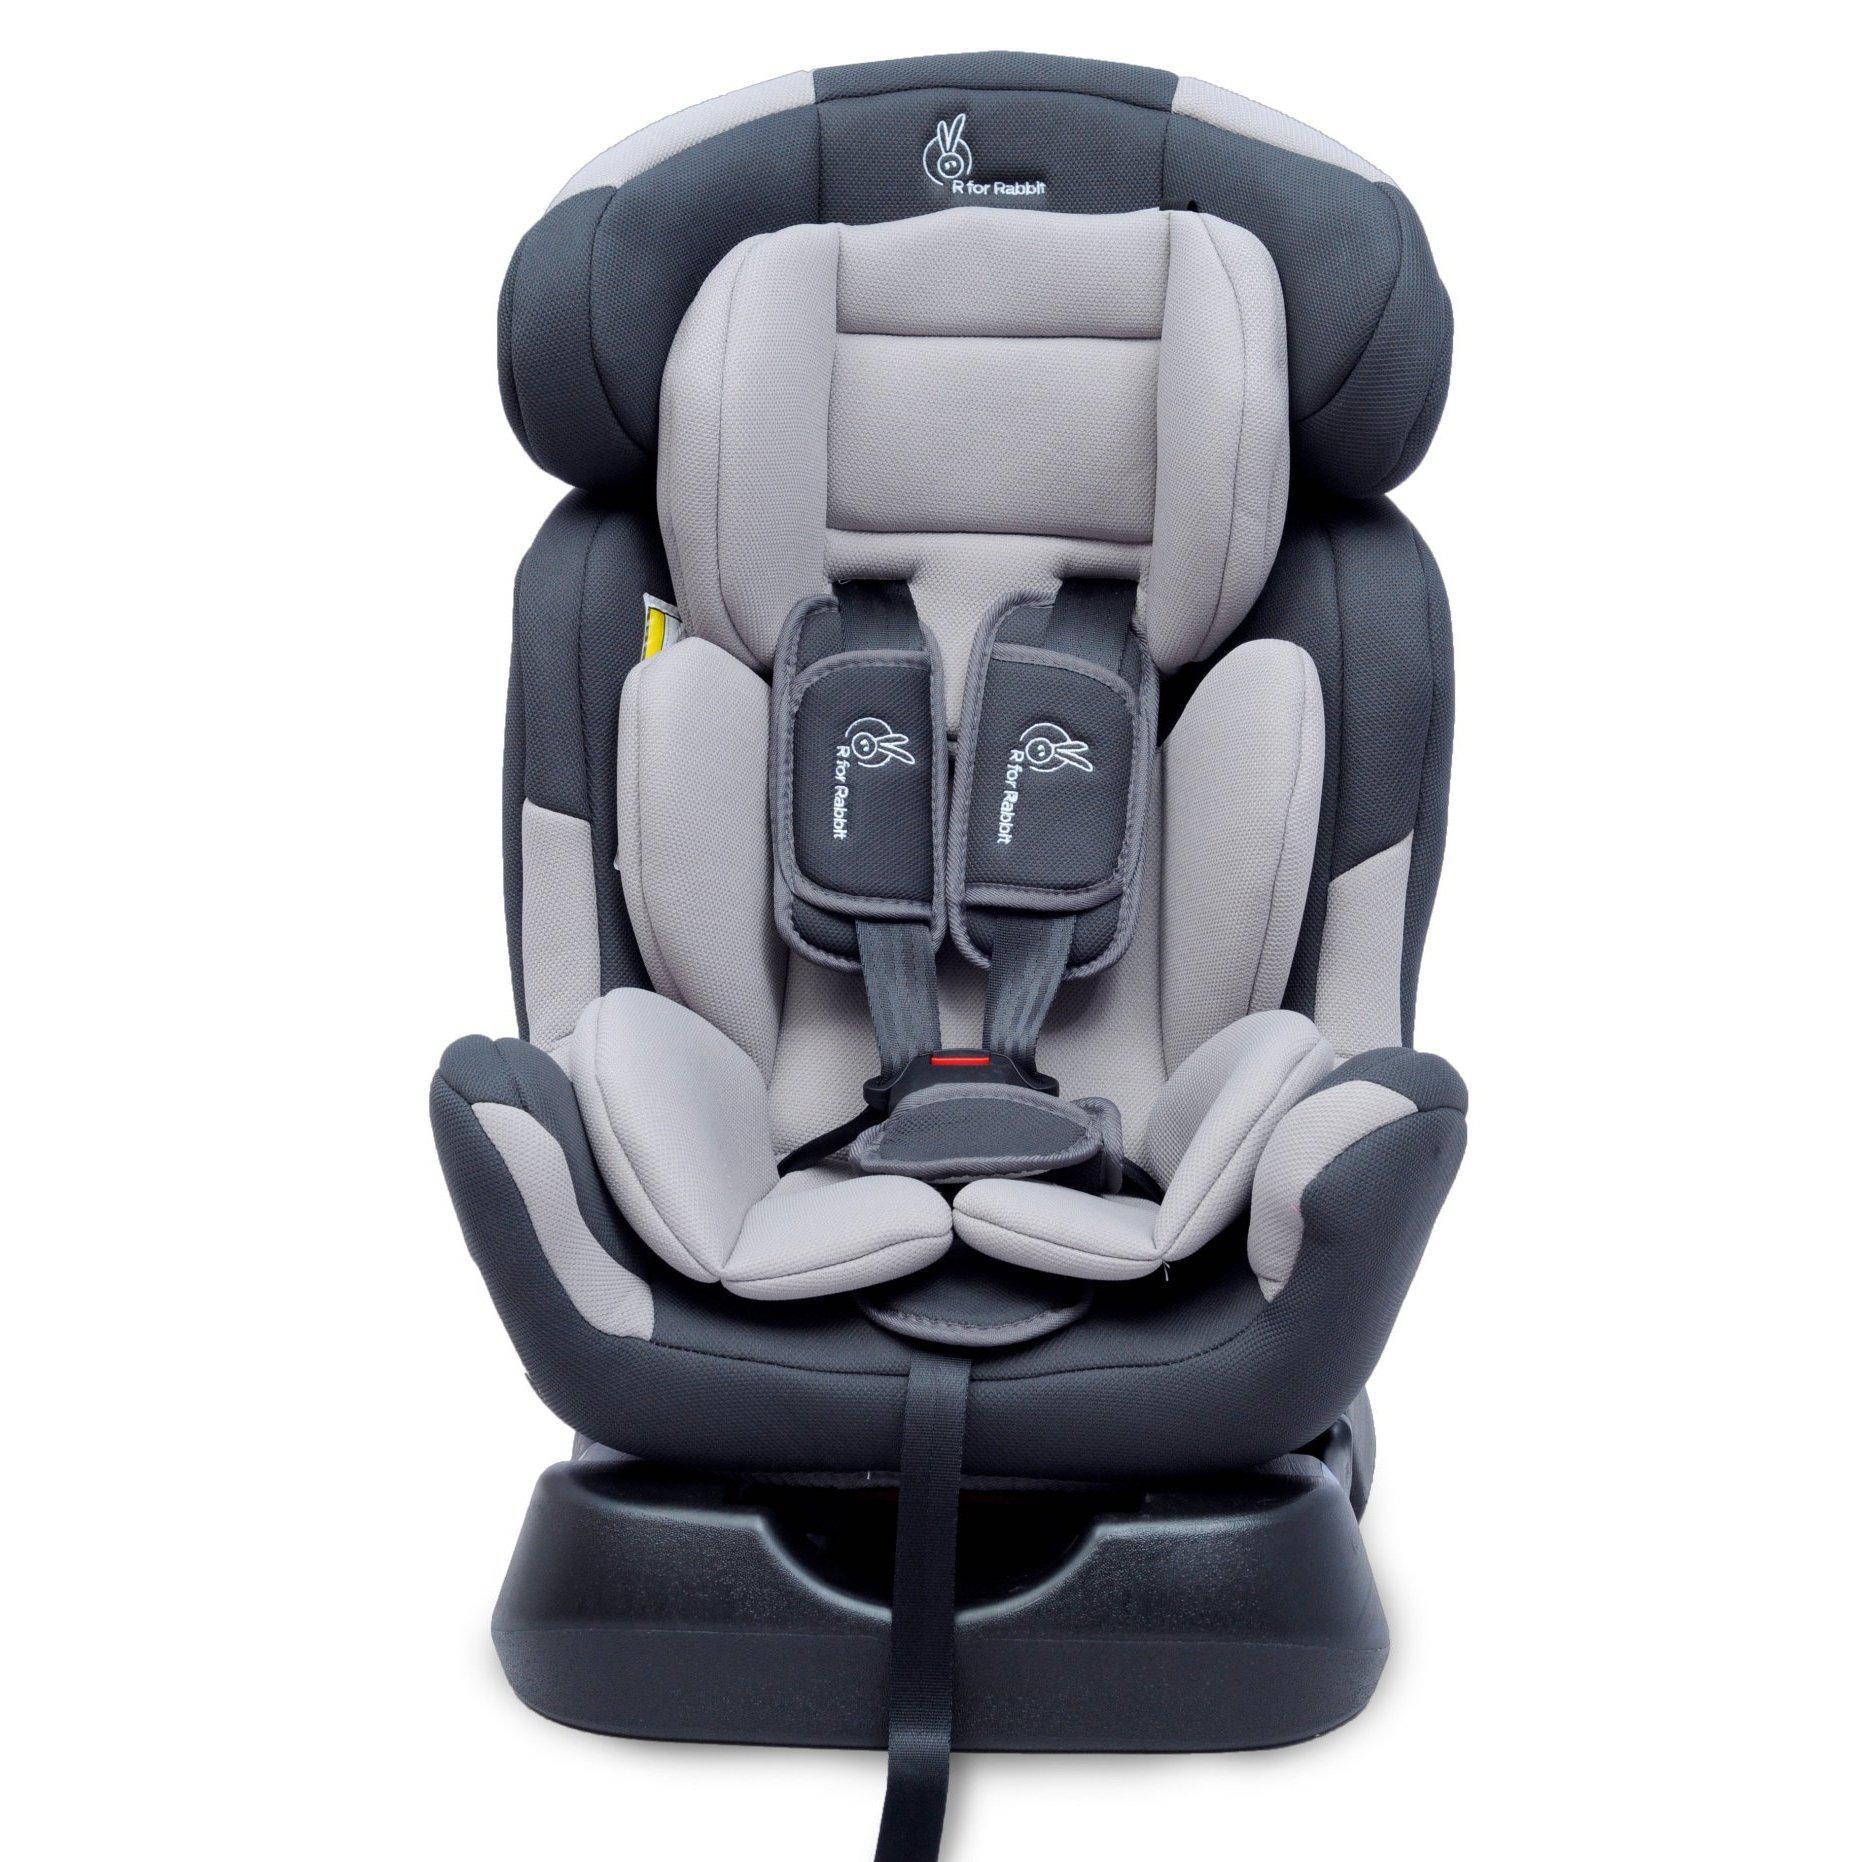 R for Rabbit Jack N Jill Grand - The Innovative Convertible Car Seat for Baby/Kids (from 0-7 Years)